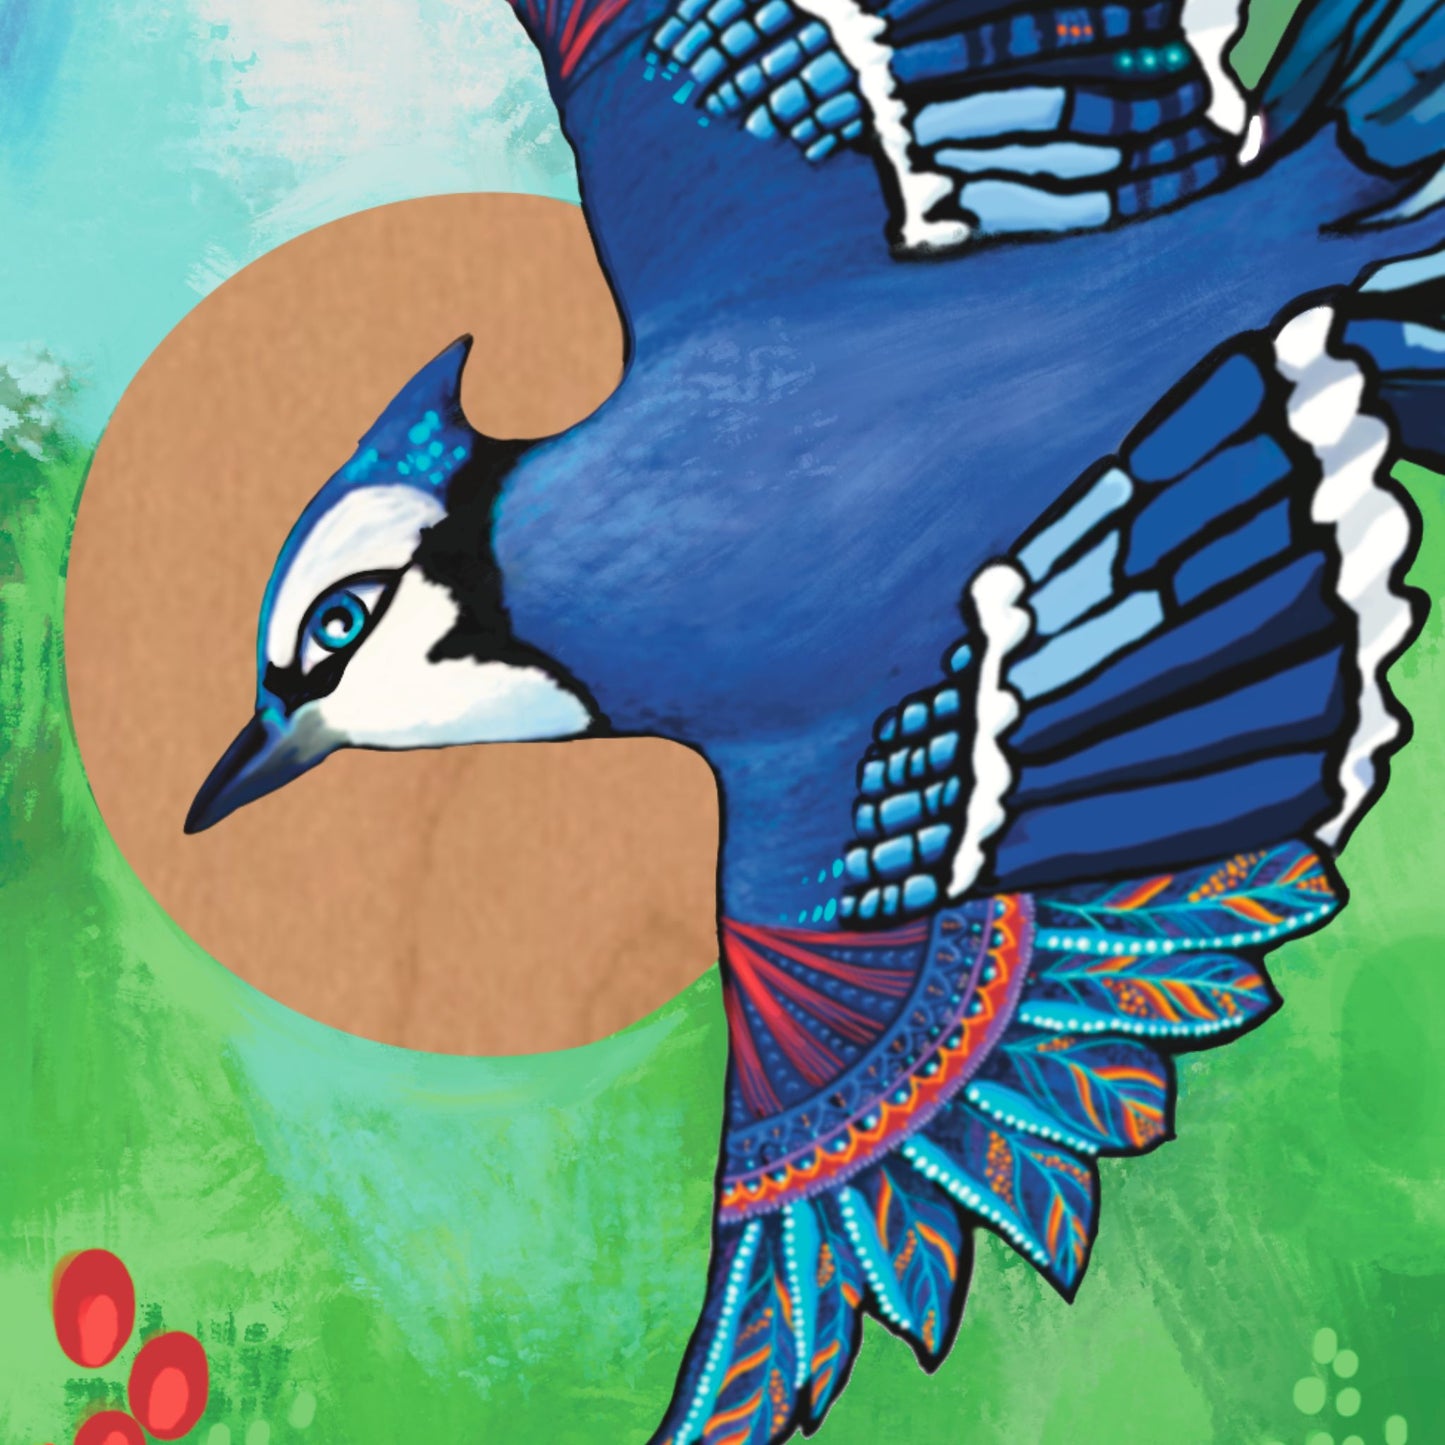 Blue Jay - UV print on a wooden cell phone holder (iPhone Android).